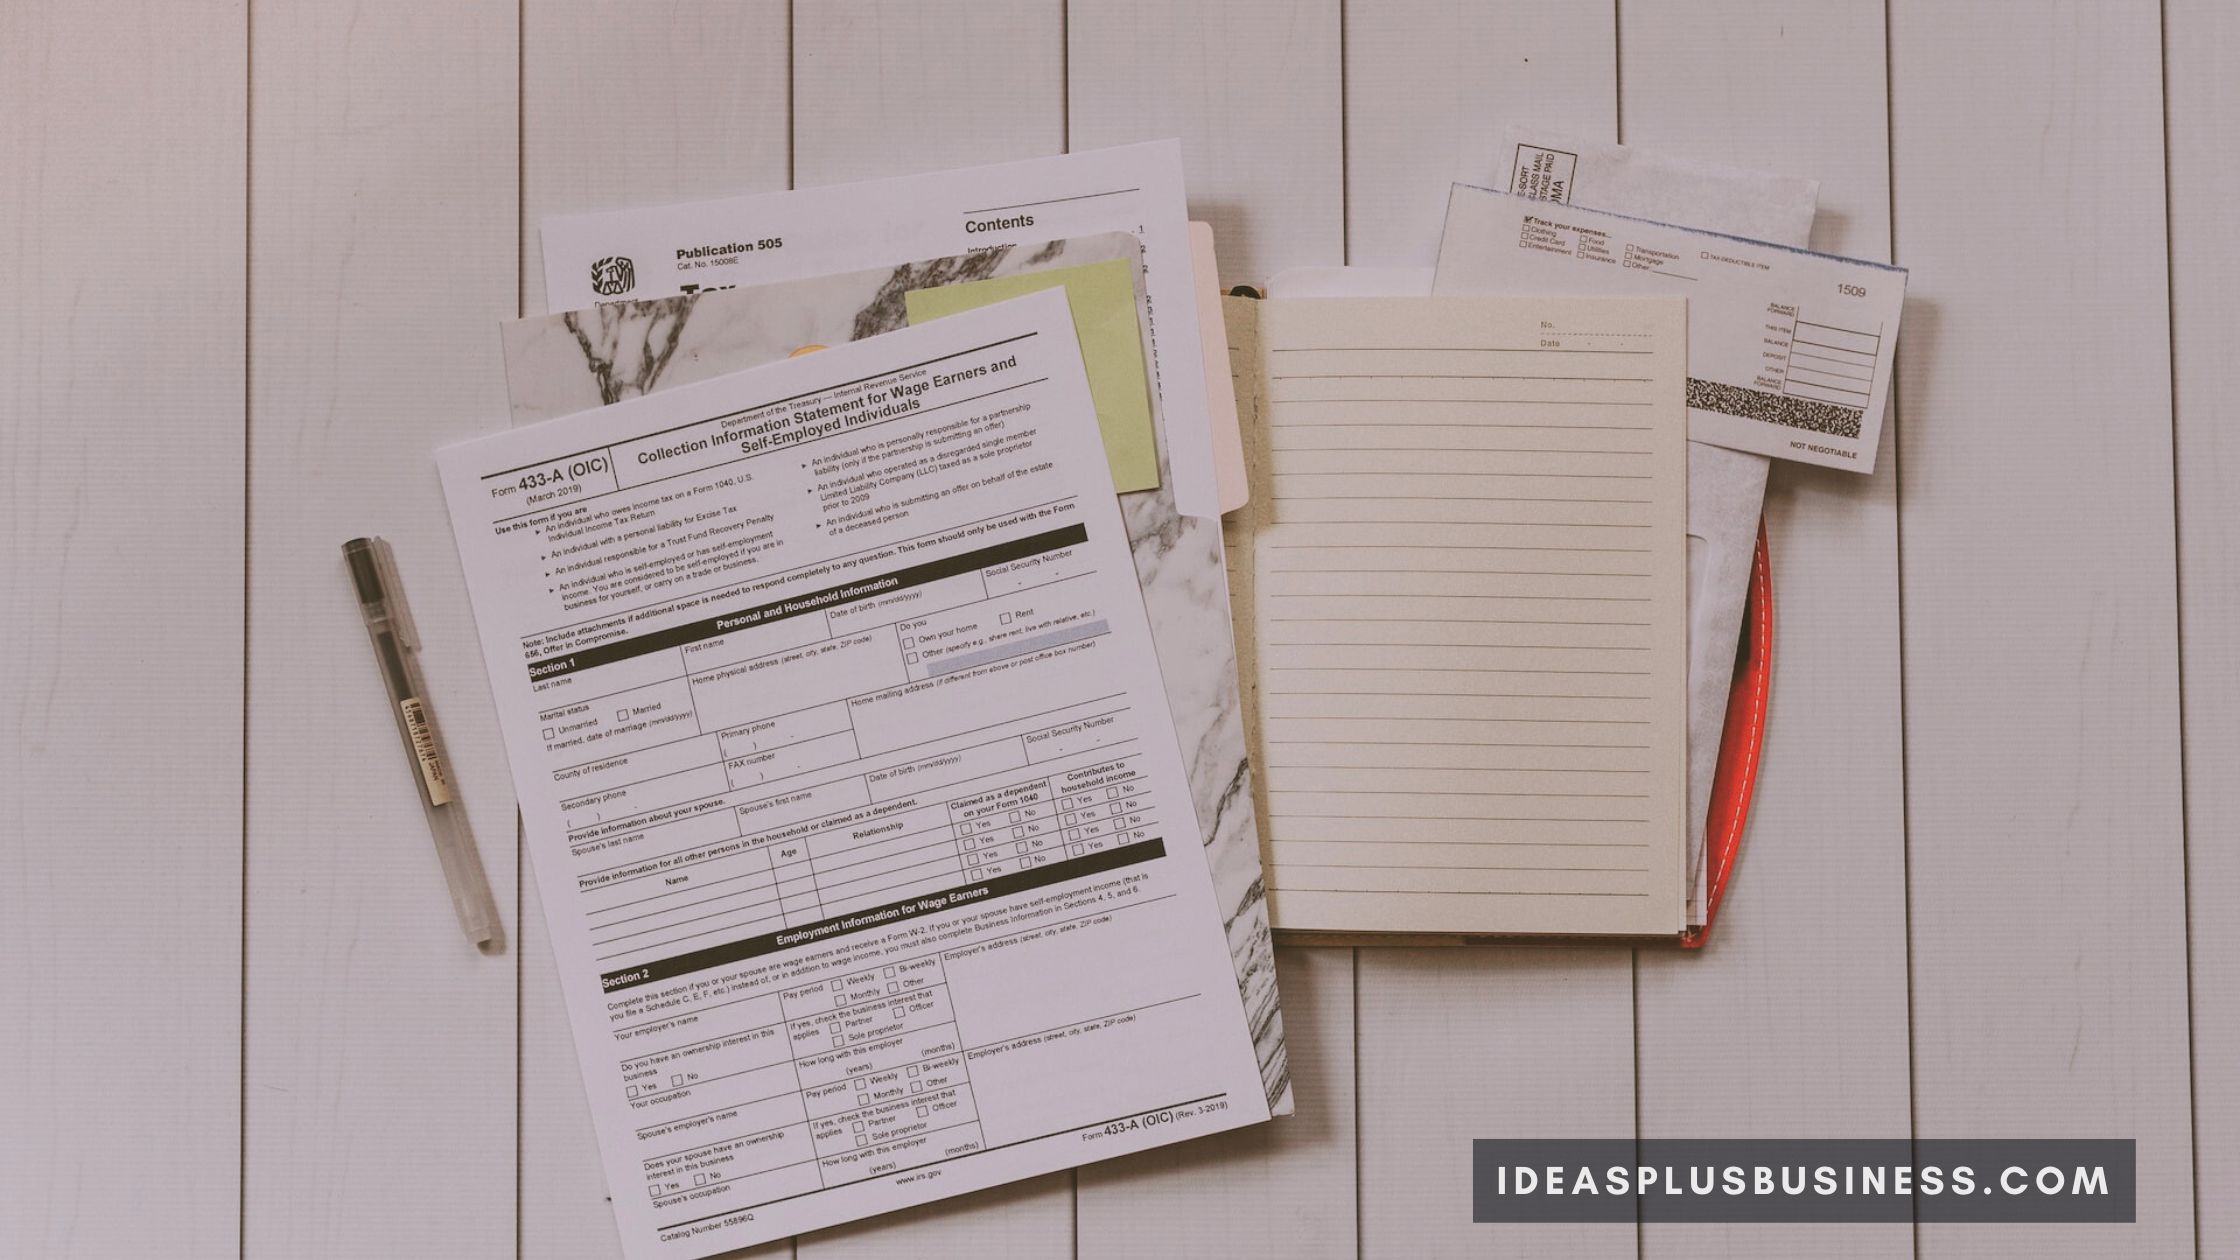 How to File Your Taxes for the First Time